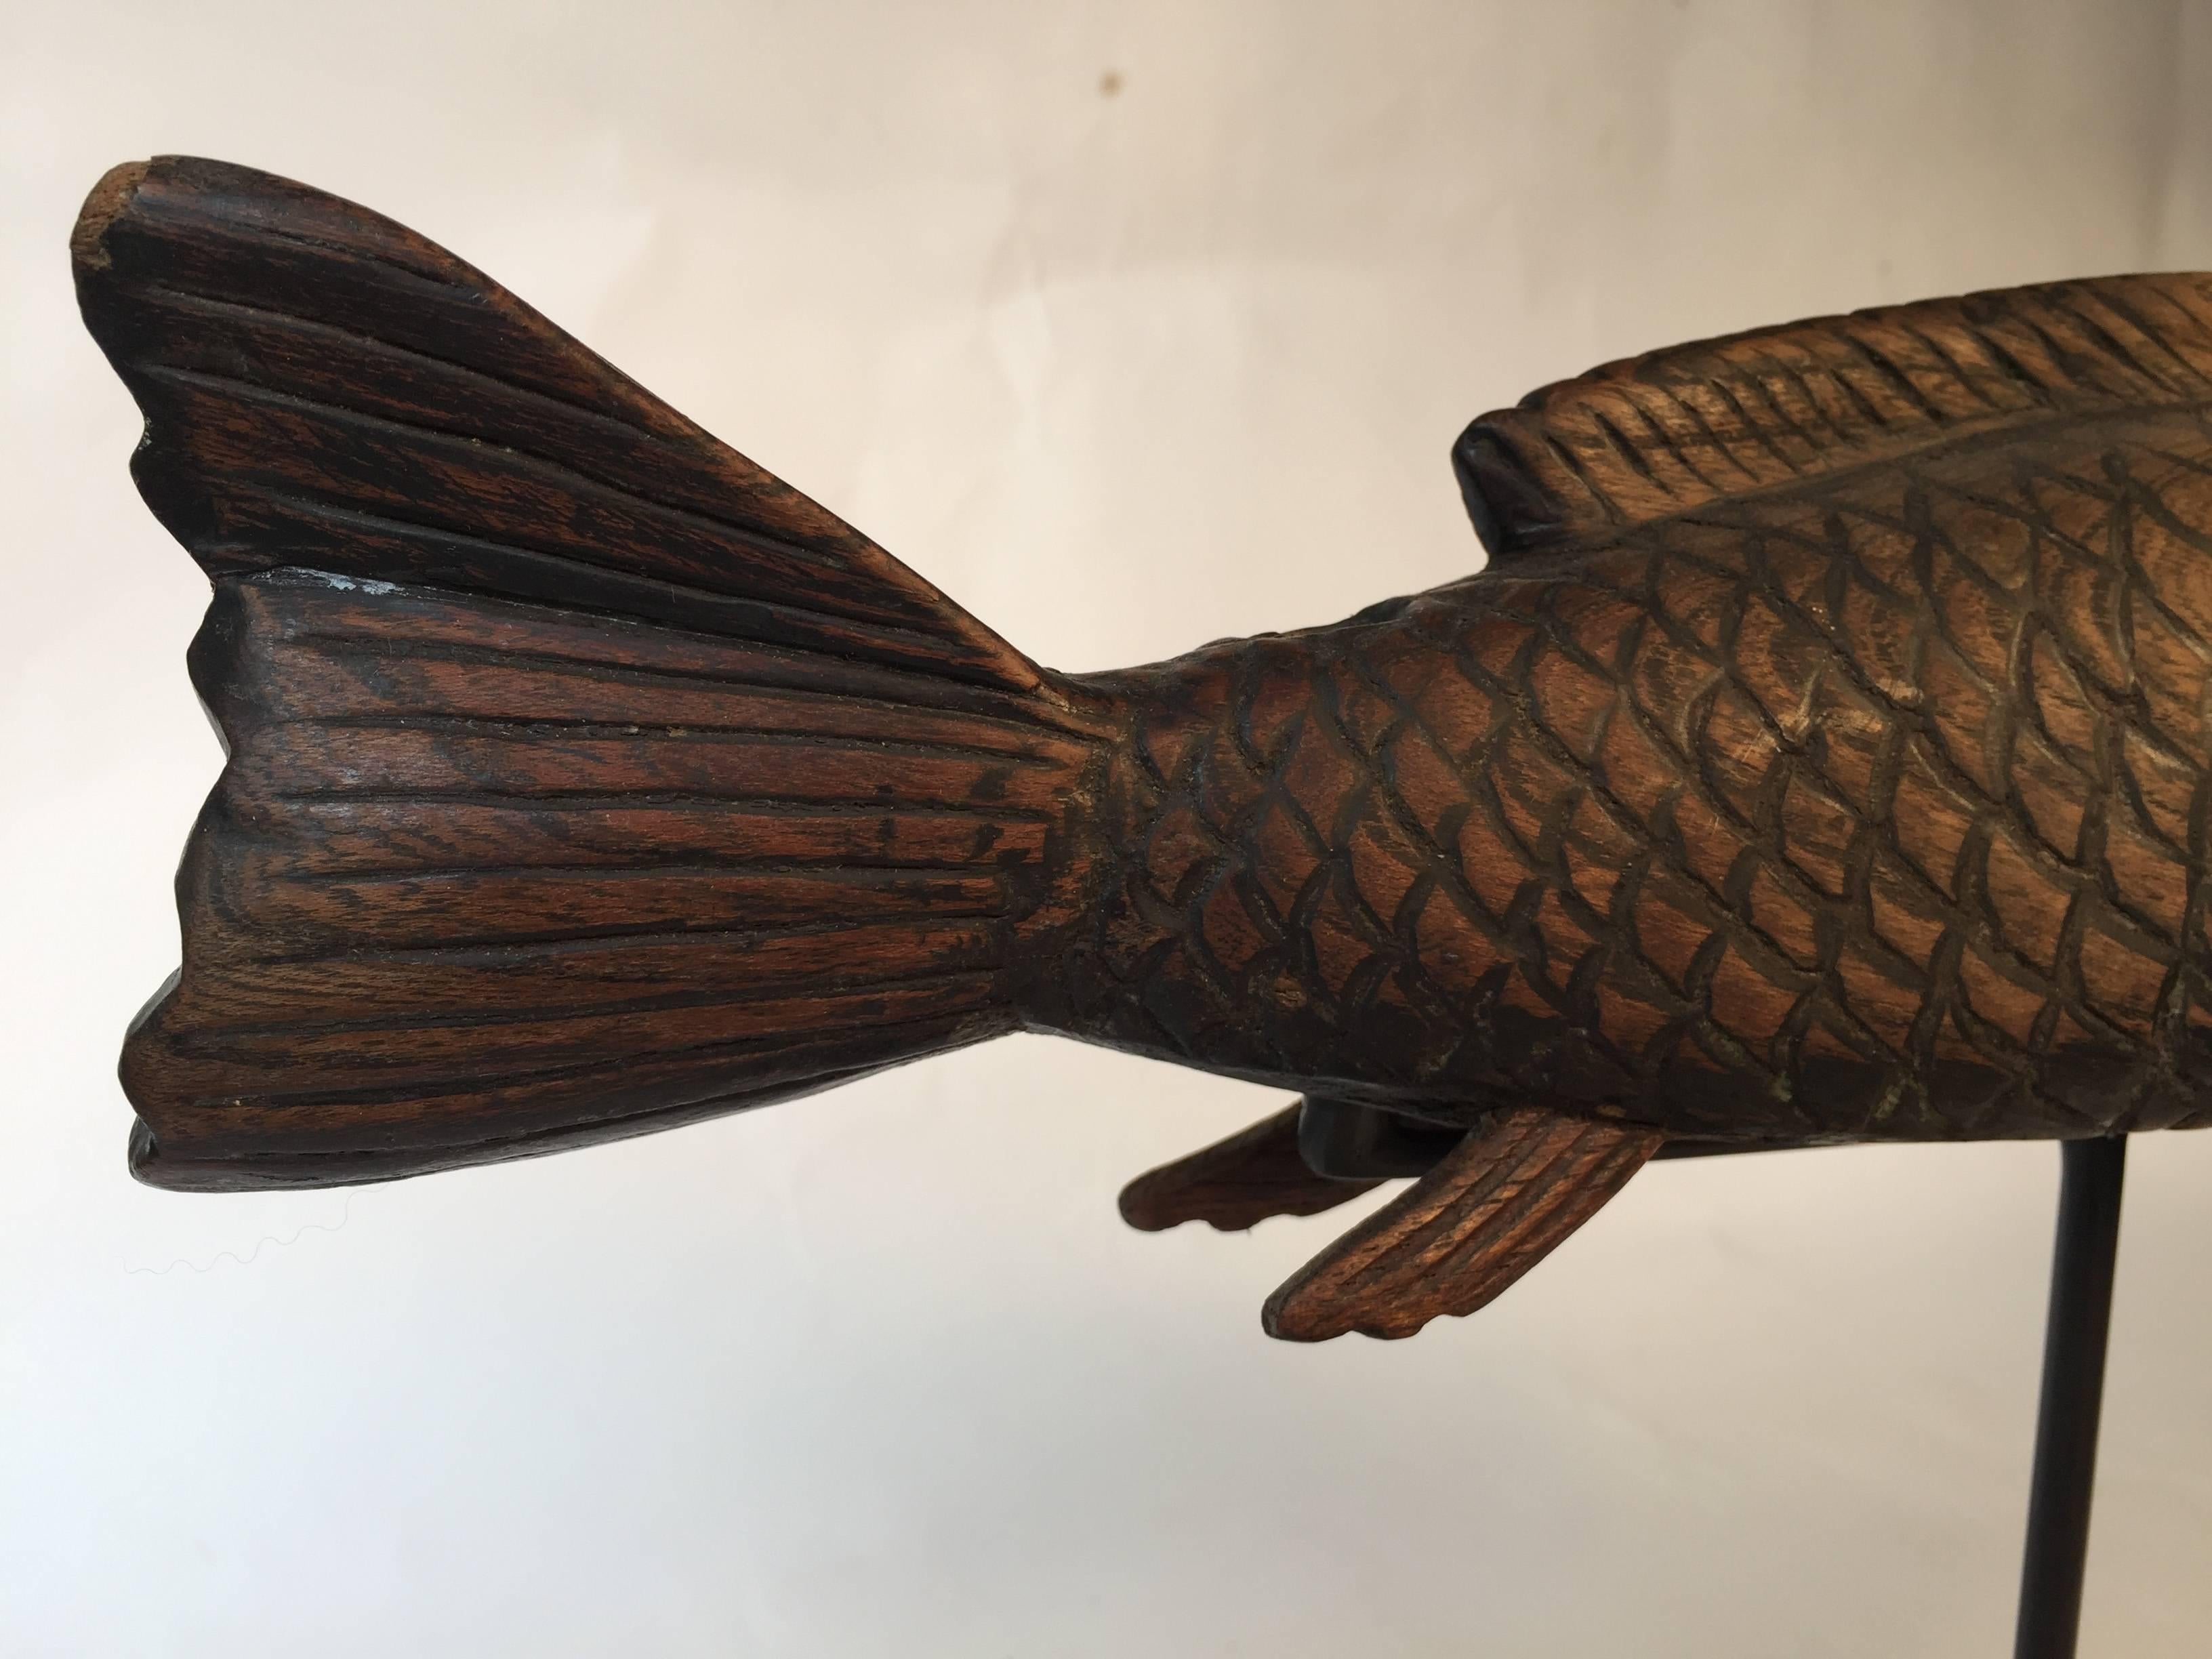 19th Century Japanese Hand-Carved Wood KOI Good Fortune Fish Sculpture, 19thc FREE SHIP